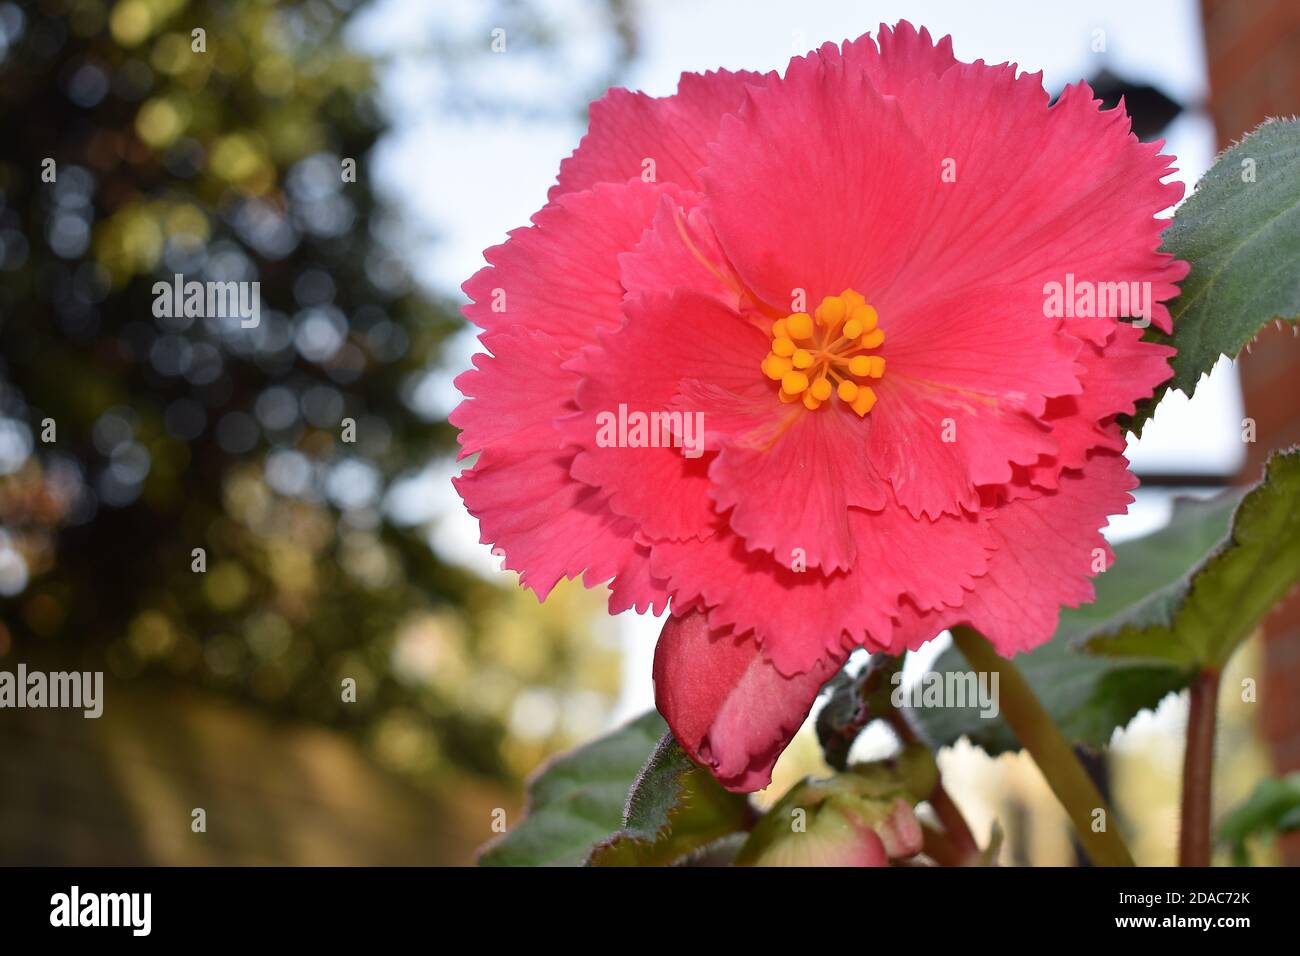 Large pink double-flowered tuberous begonias with frilled petals They grow upright from tubers with big arrow-shaped leaves Begonia is container plant Stock Photo